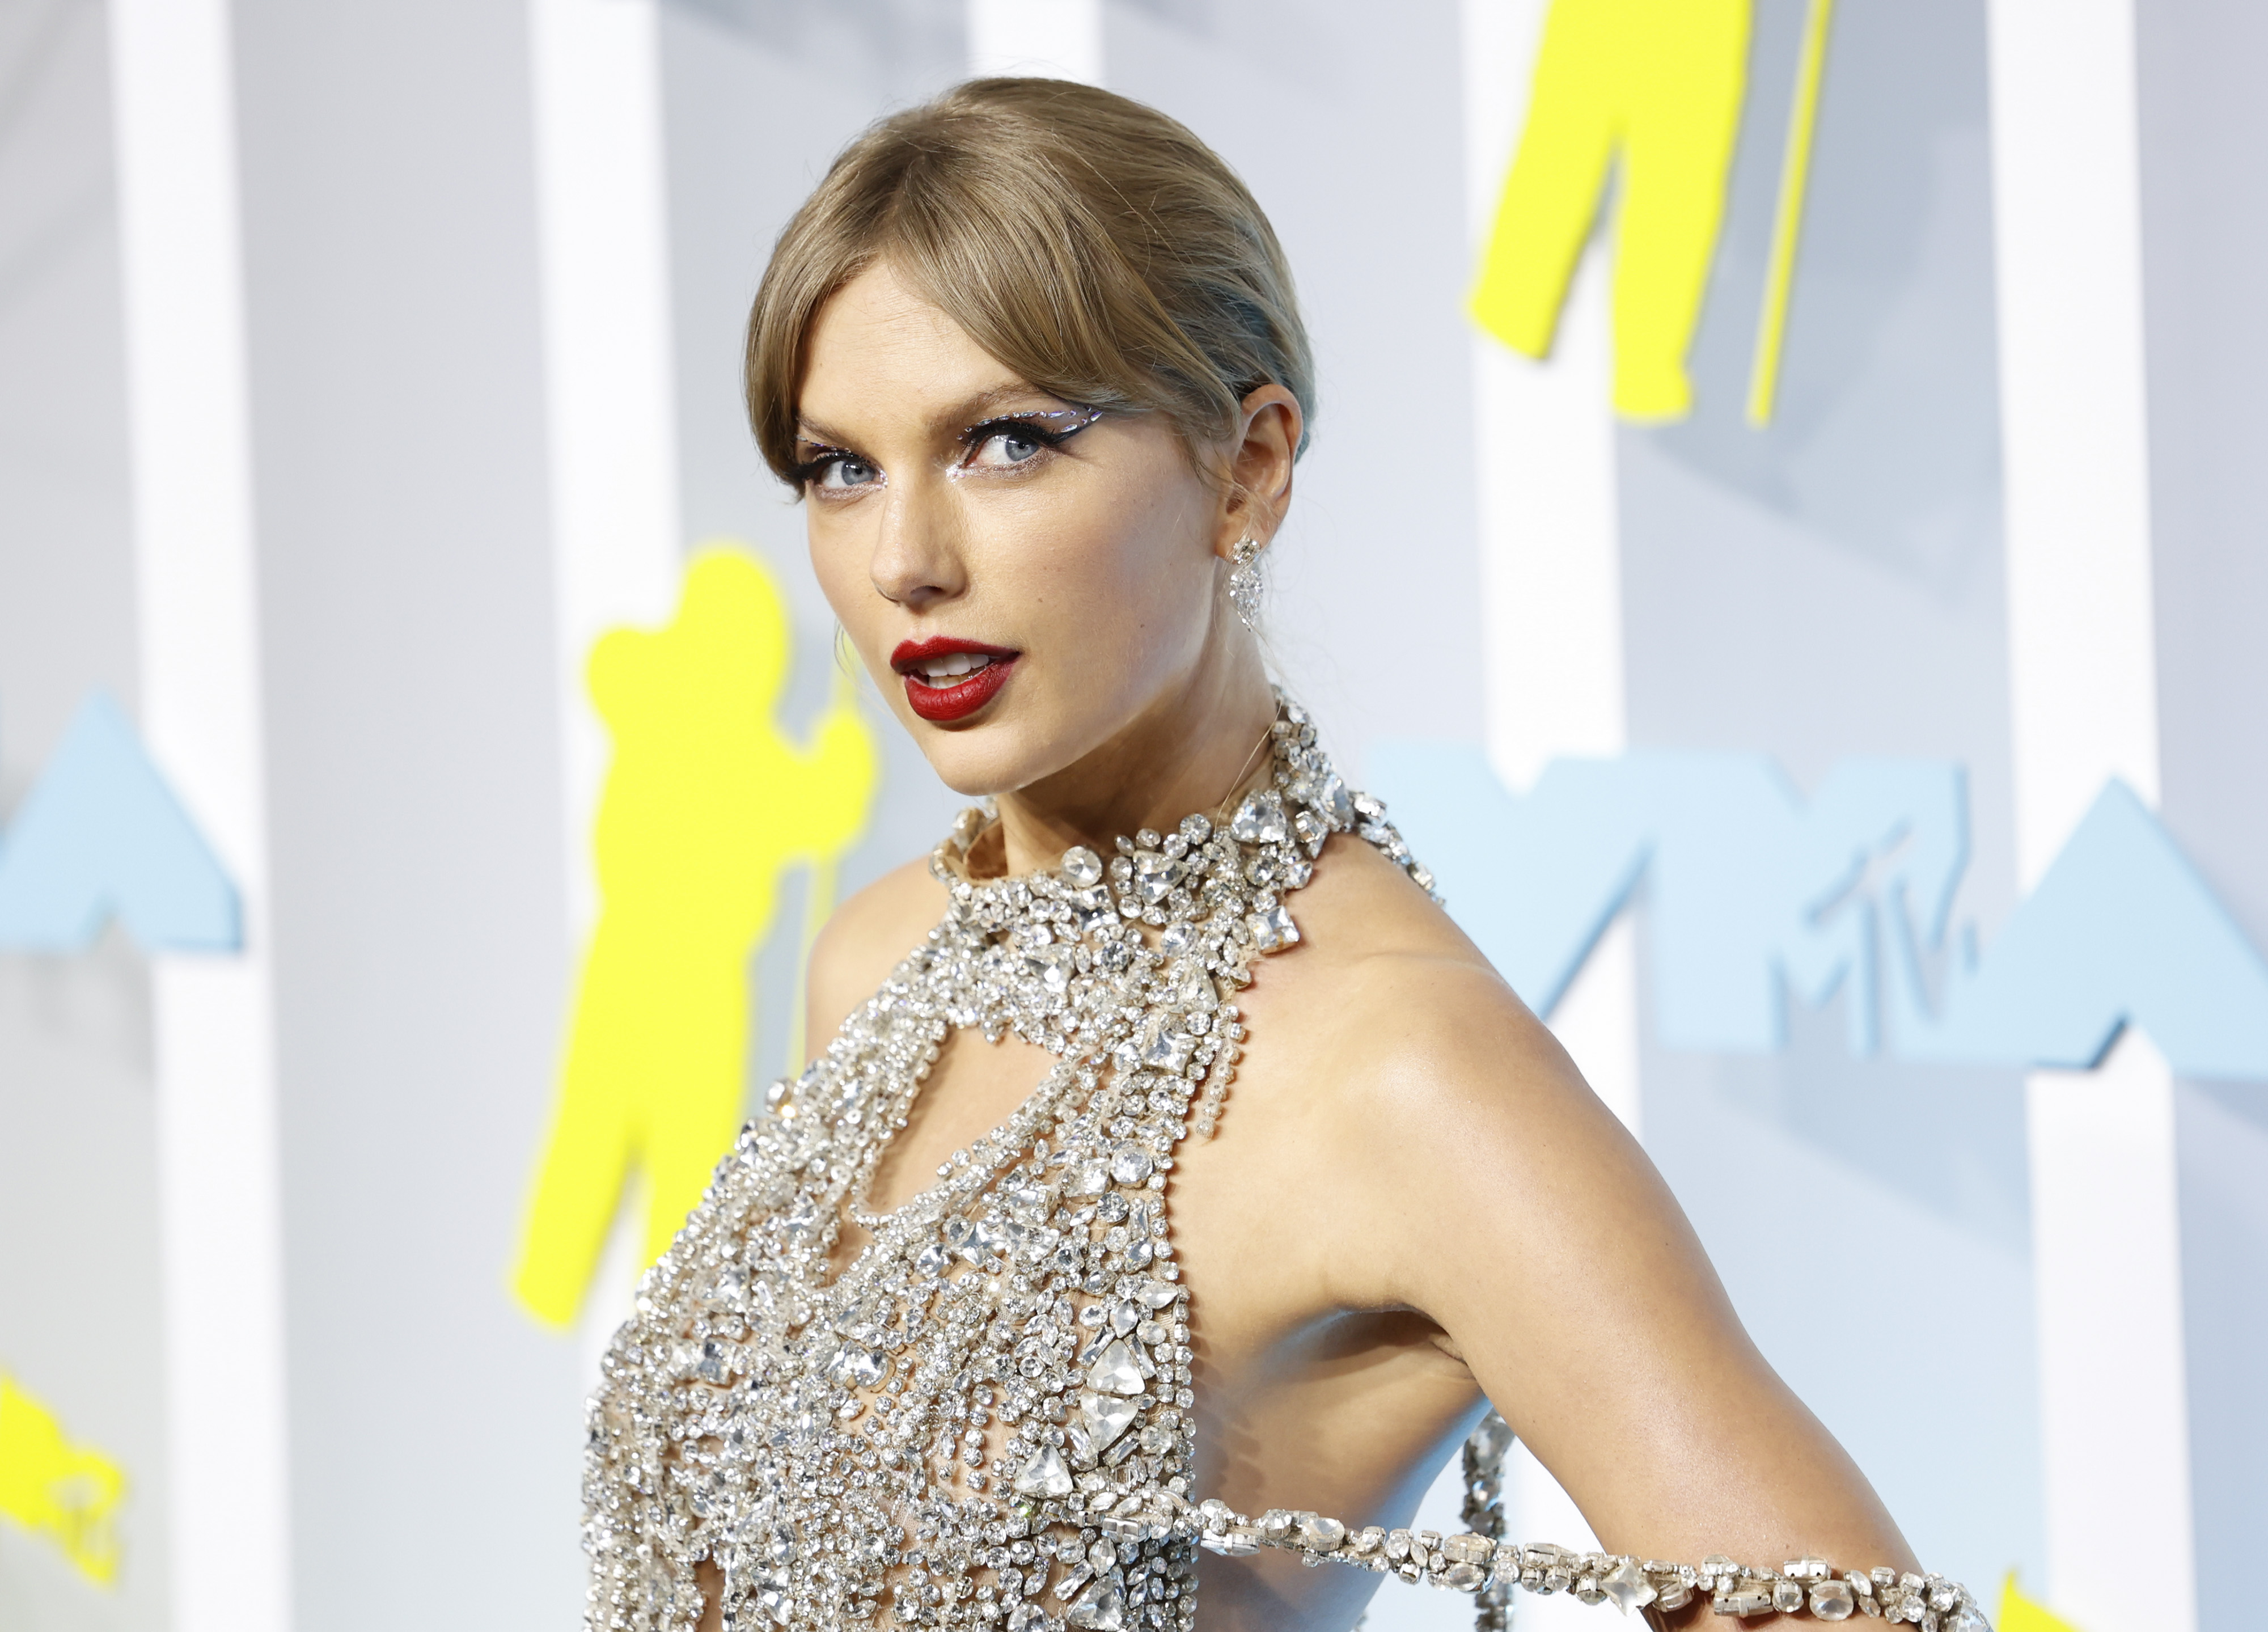 Taylor Swift Releases New Album Midnights: Listen and Read the